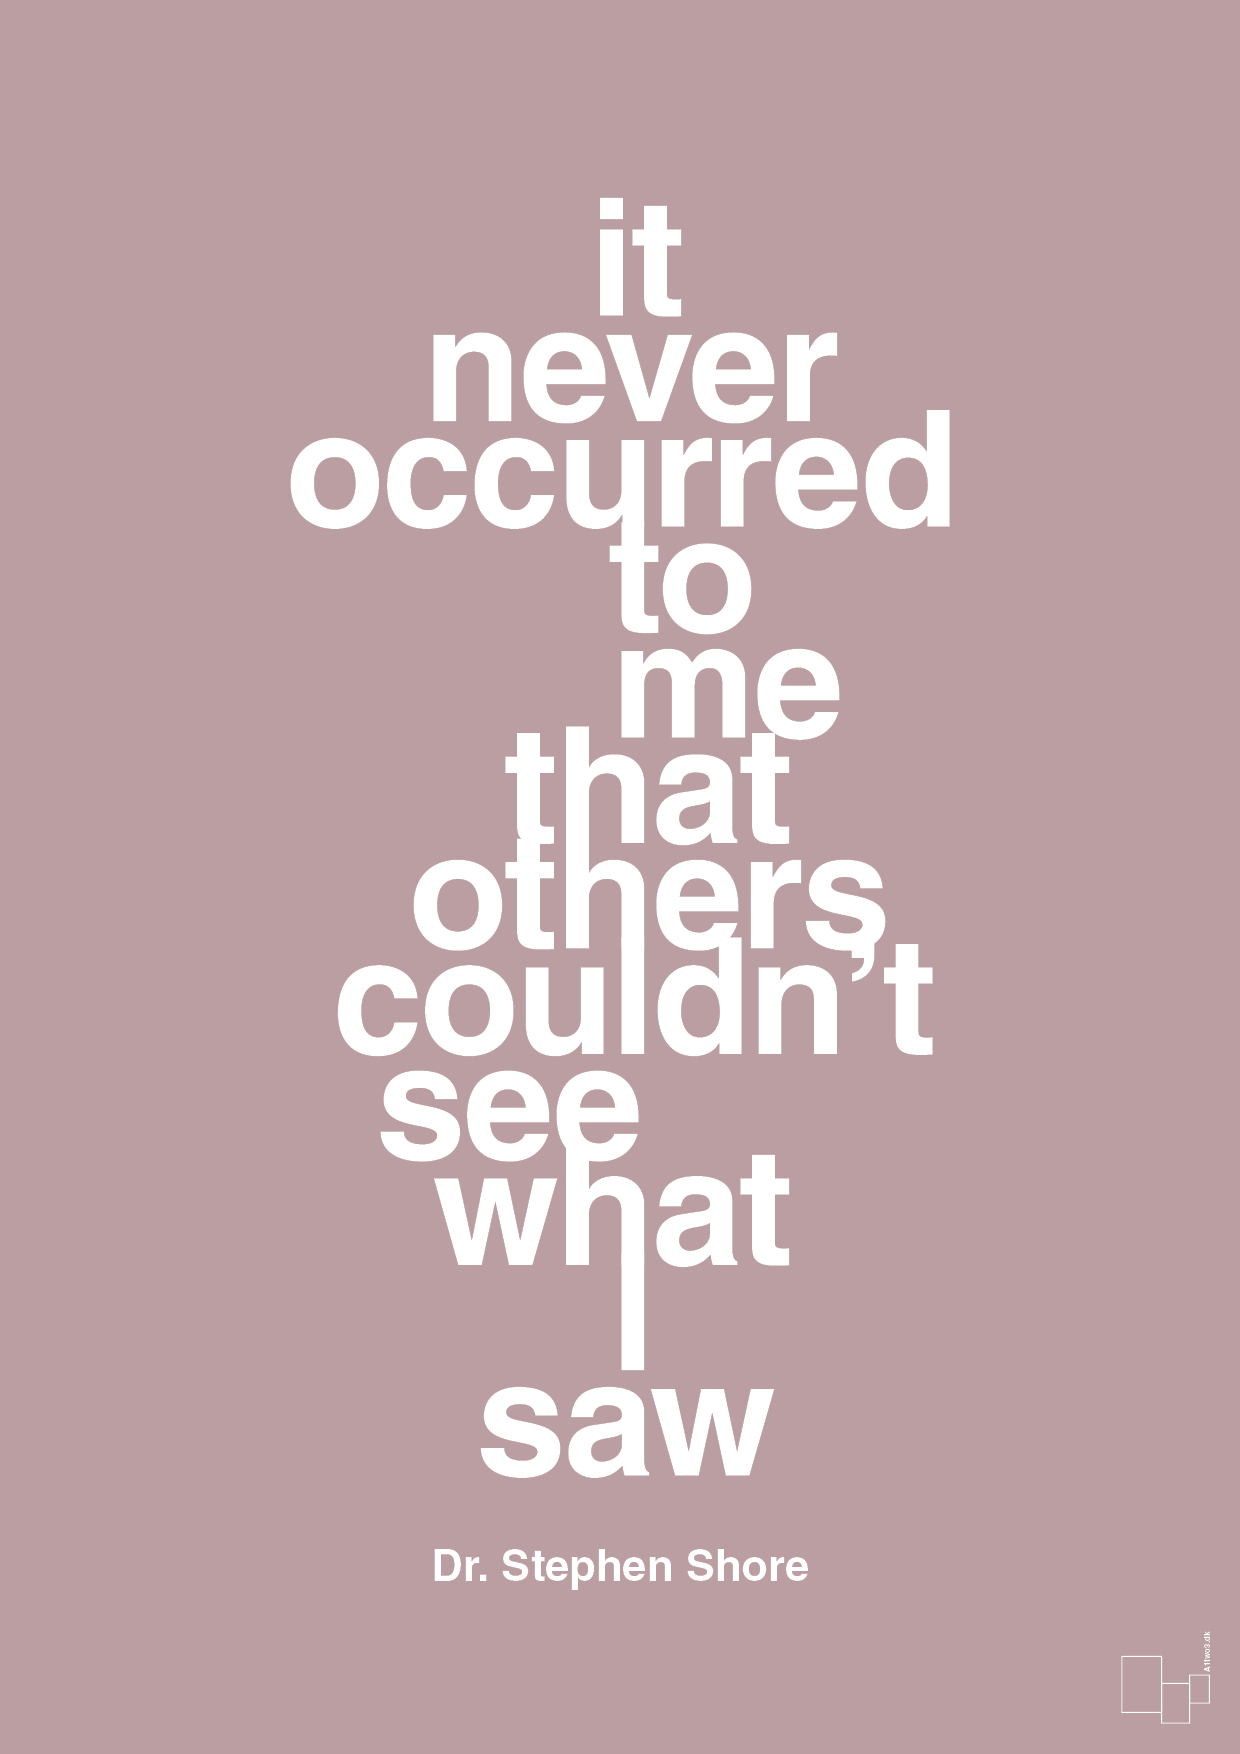 it never occurred to me that others couldn’t see what I saw - Plakat med Samfund i Light Rose